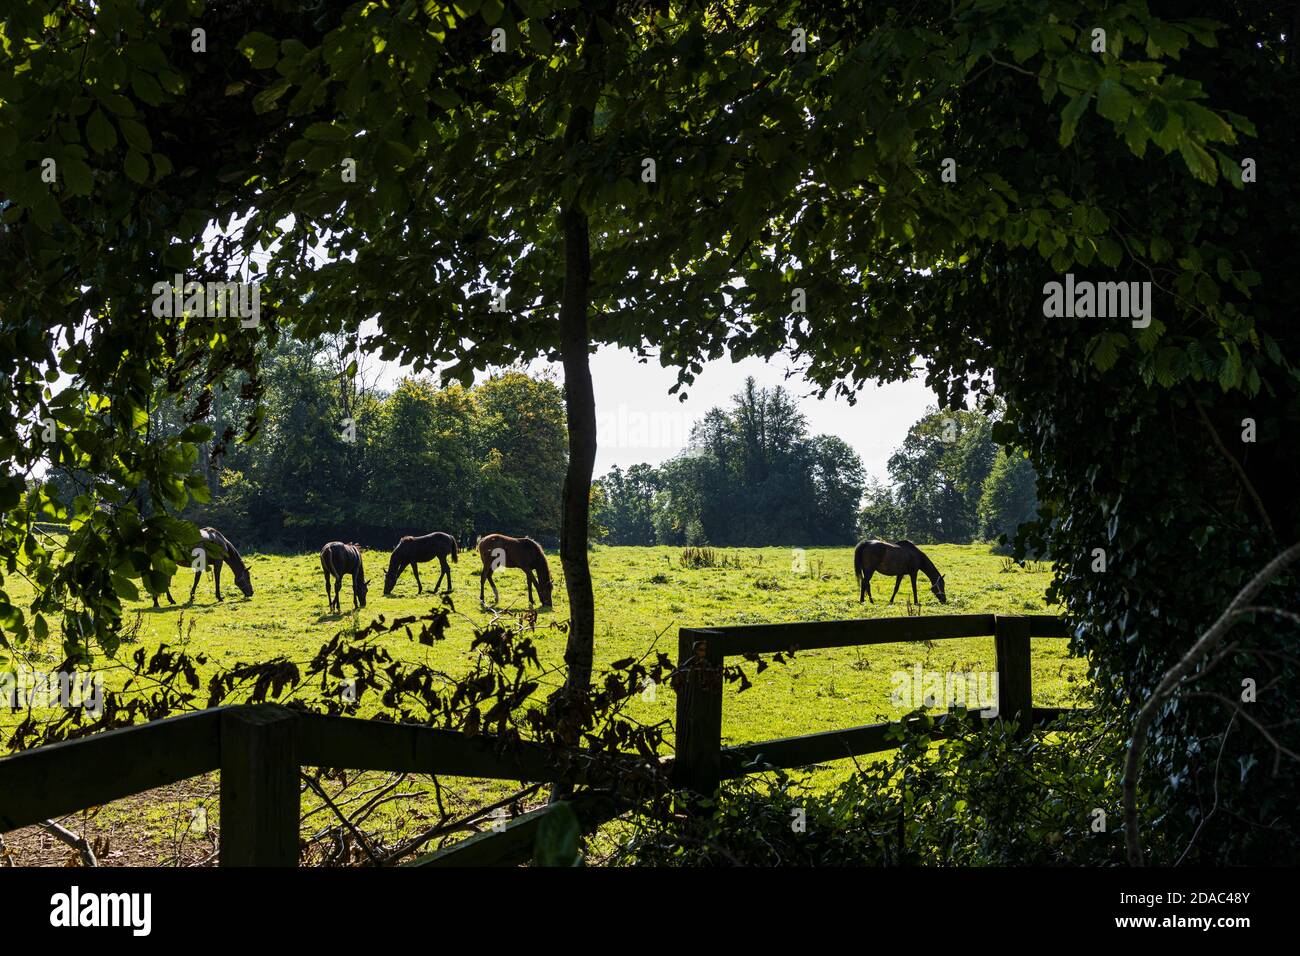 Horses grazing in a field at the estate stud, Palmerstown House, Johnstown, County Kildare, Ireland Stock Photo